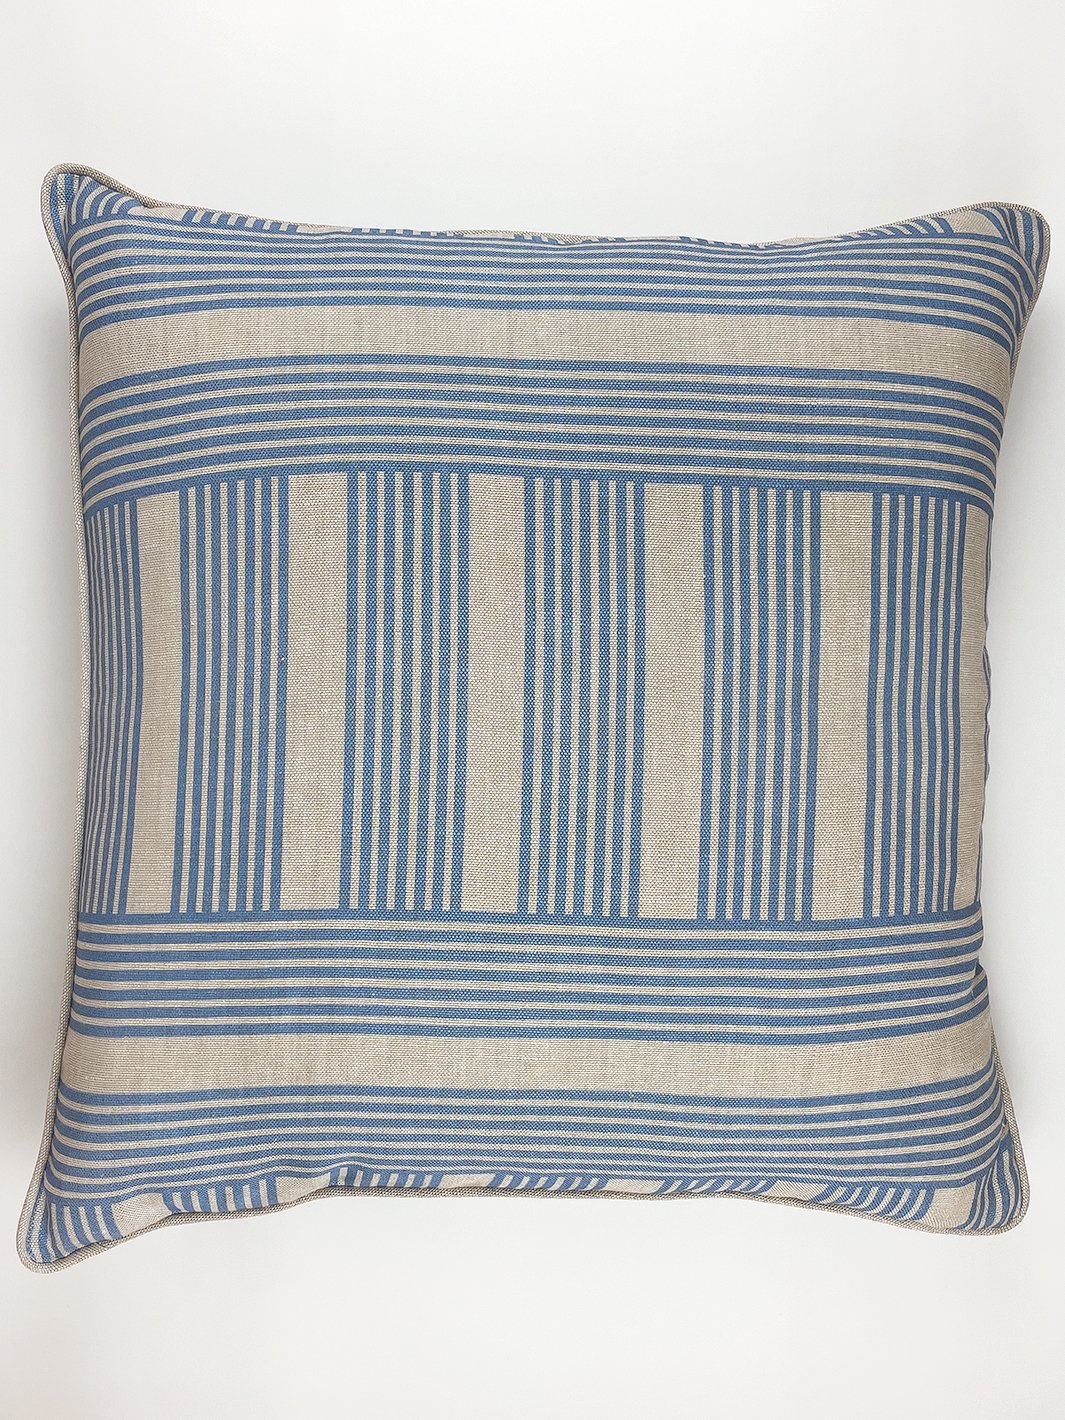 'Roman Holiday Grid' Throw Pillow by Barbie™ - Blue